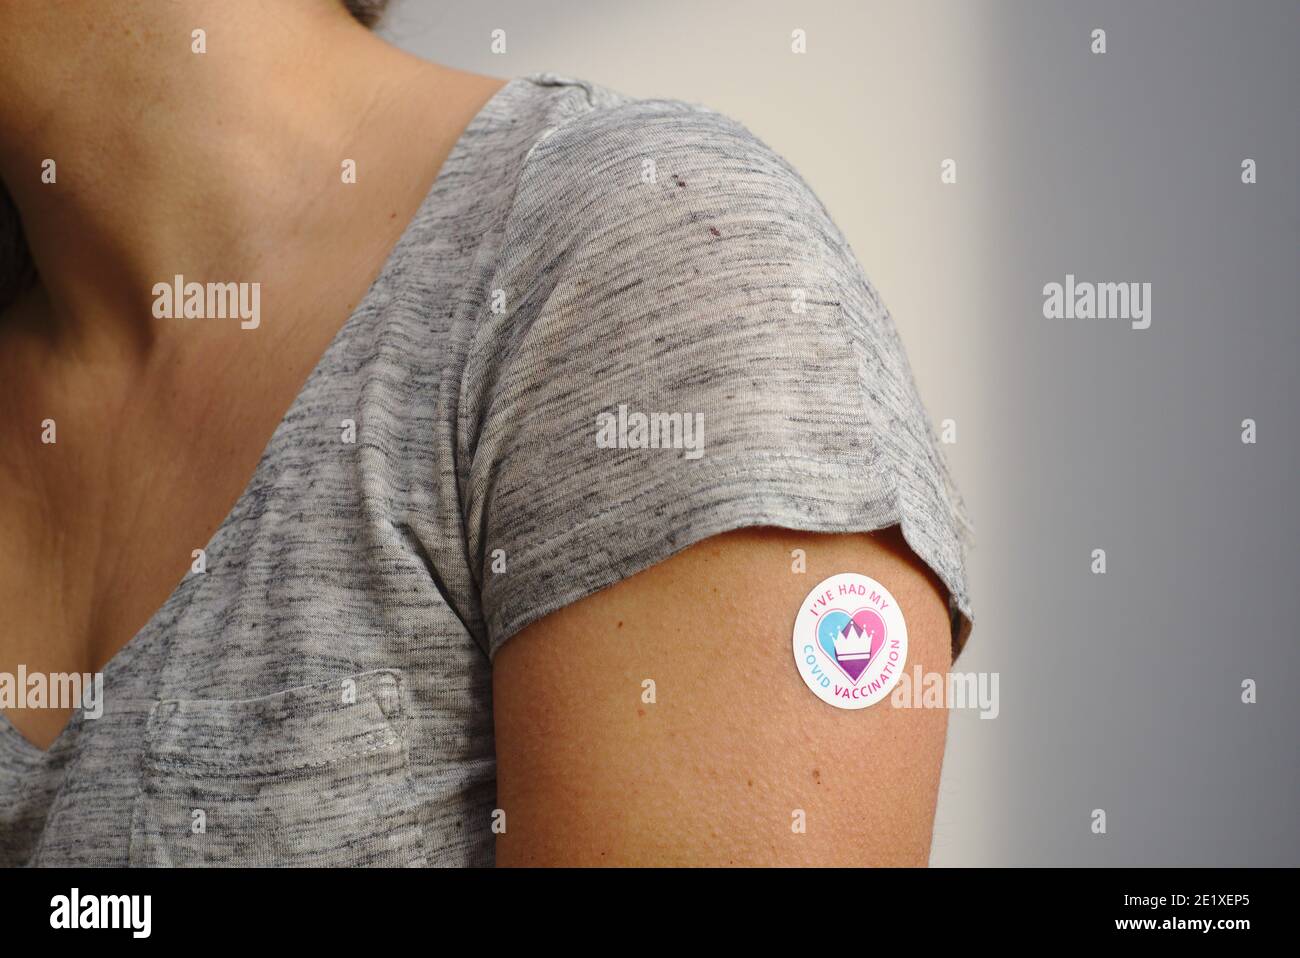 Sticker saying I've had my Covid Vaccination on arm of vaccine recipient. Stock Photo